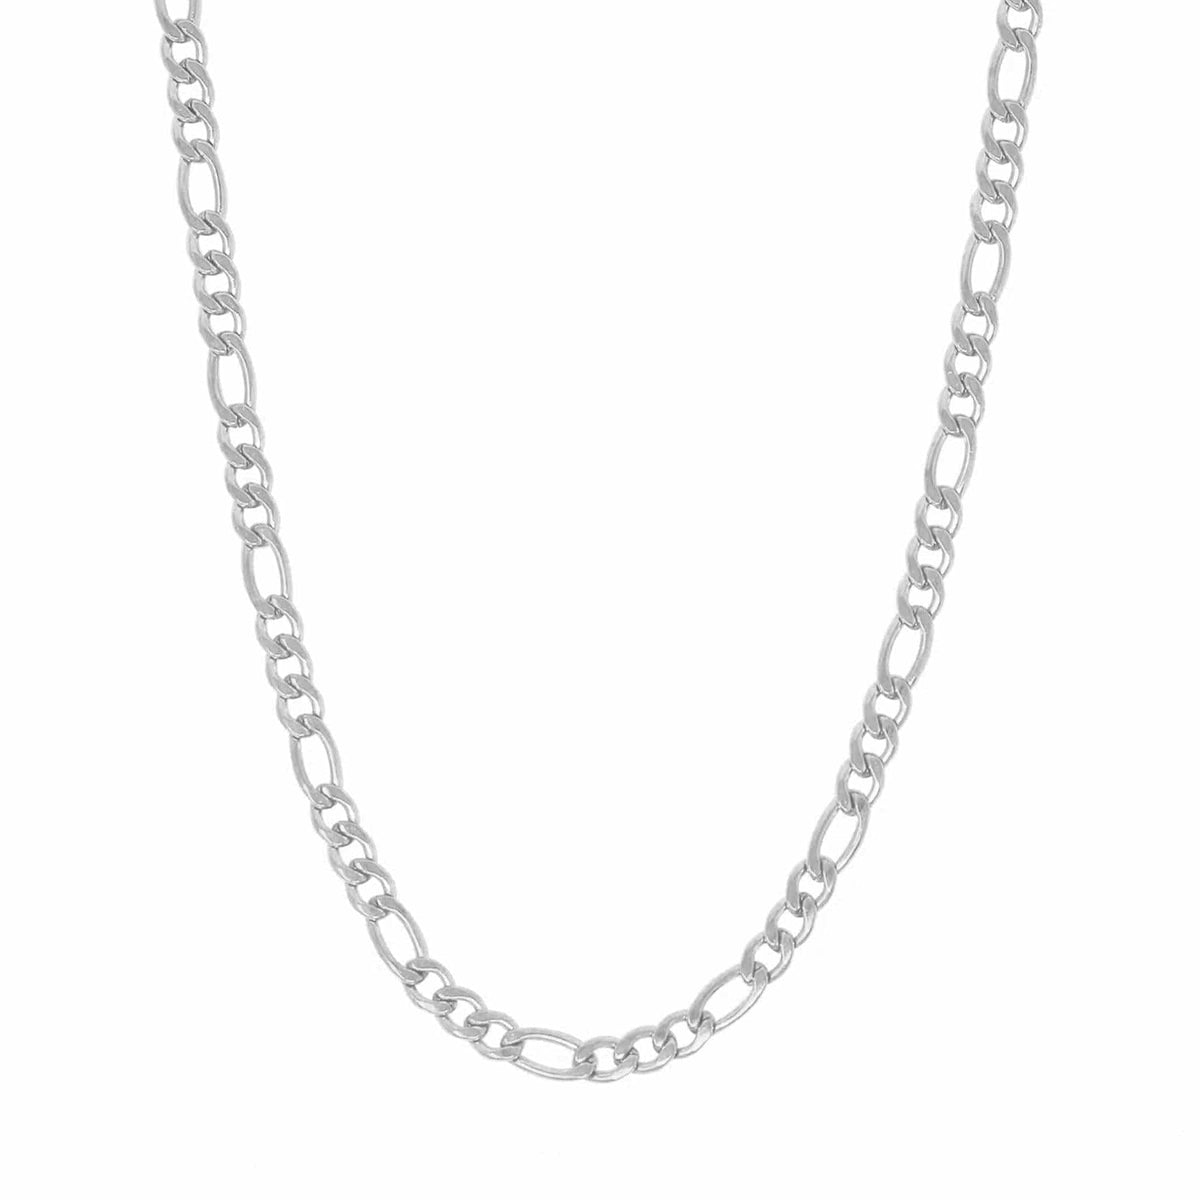 BohoMoon Stainless Steel Figaro Chain Necklace Silver / 18"